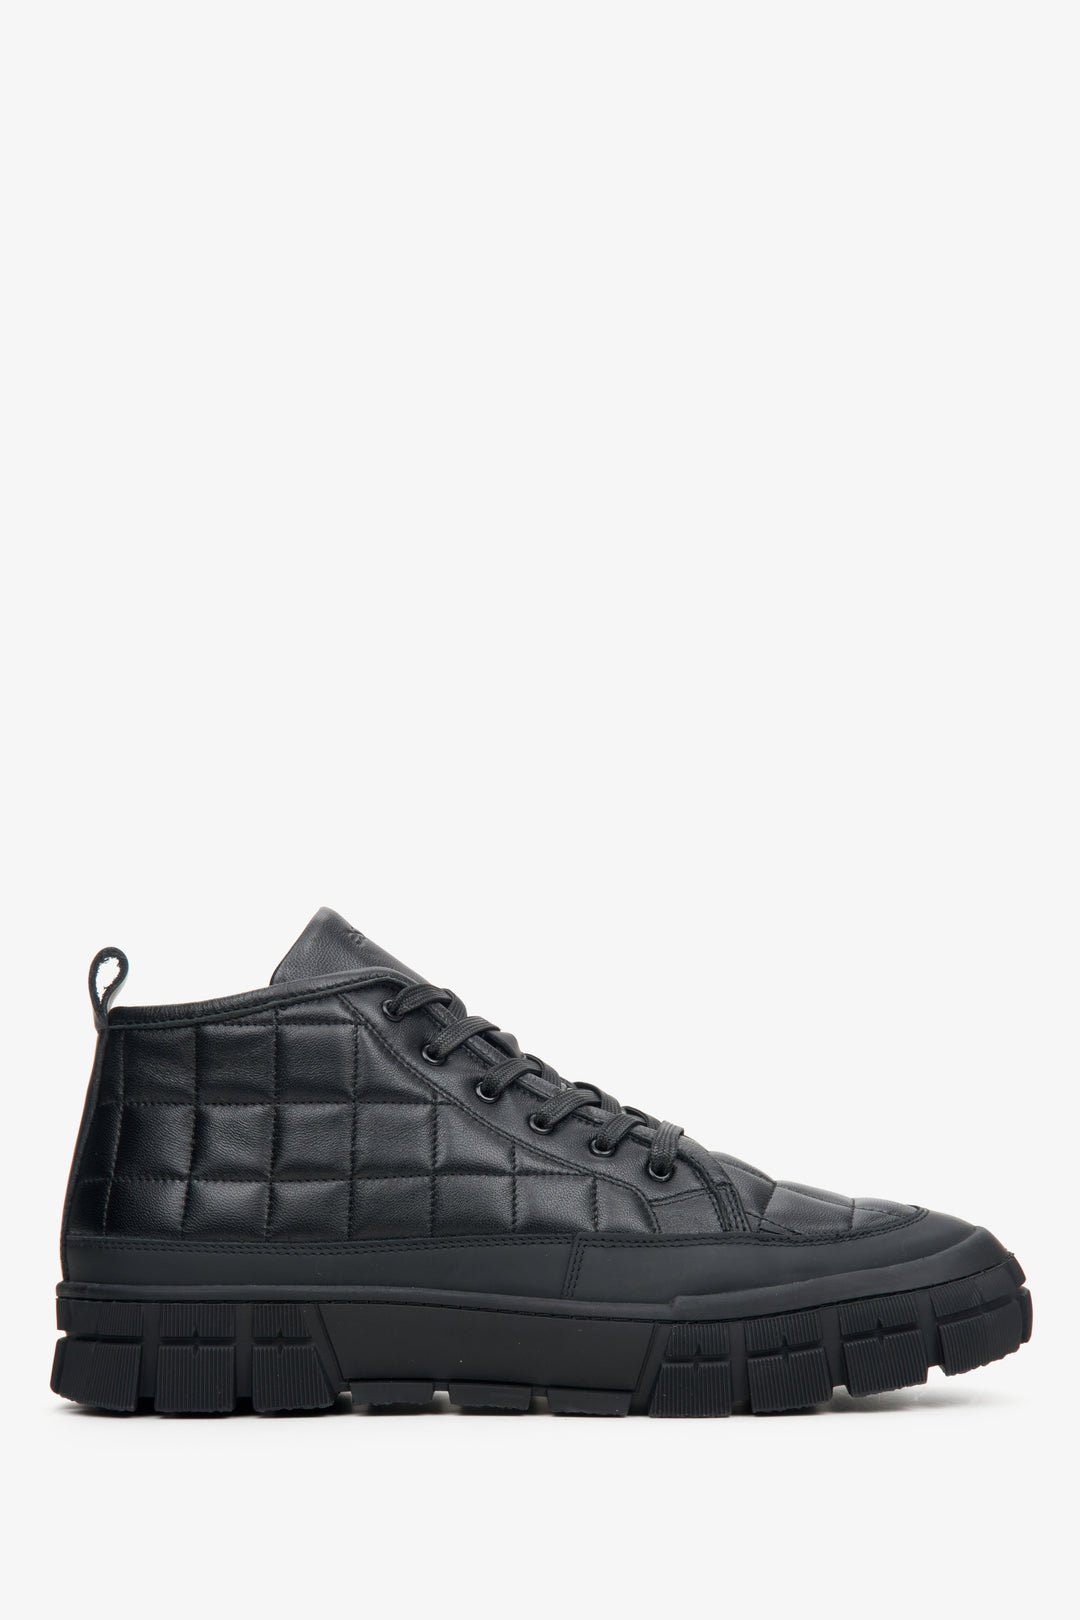 Men's Black High-top Sneakers with Insulation made of Genuine Leather for Winter Estro ER00113912.